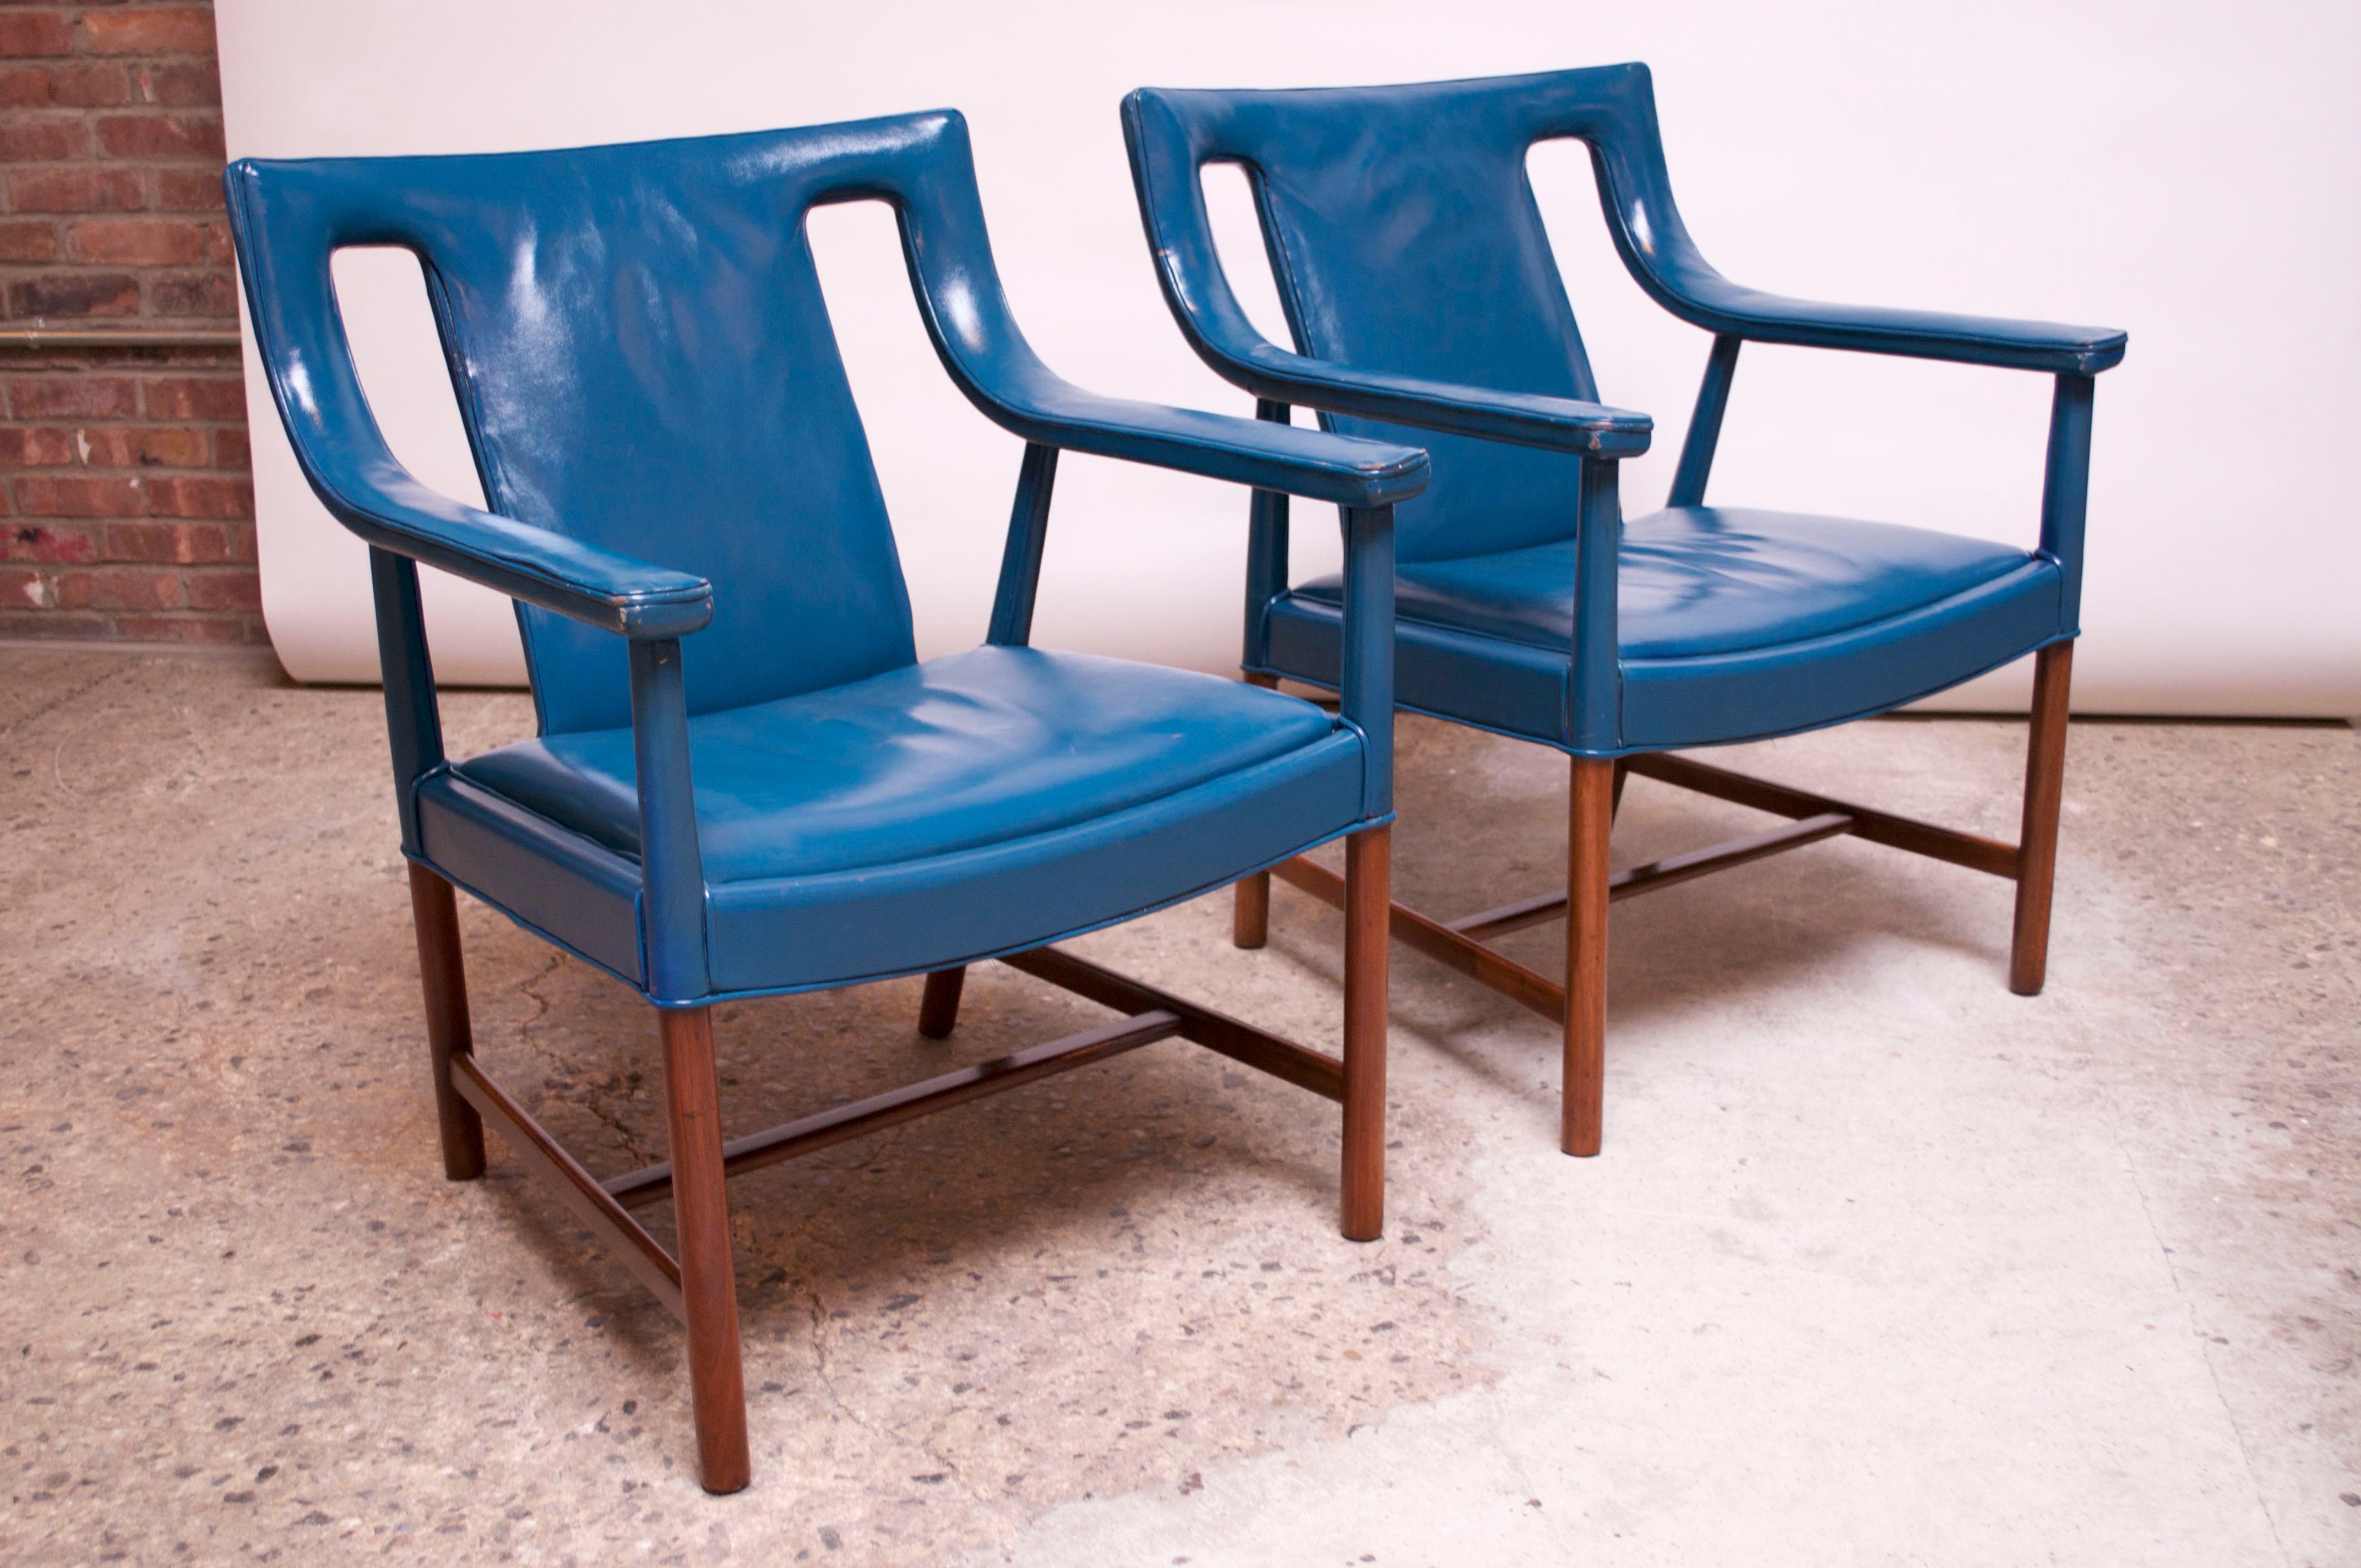 Mid-Century Modern Pair of Danish Blue Leather Armchairs by Ejner Larsen and Aksel Bender Madsen